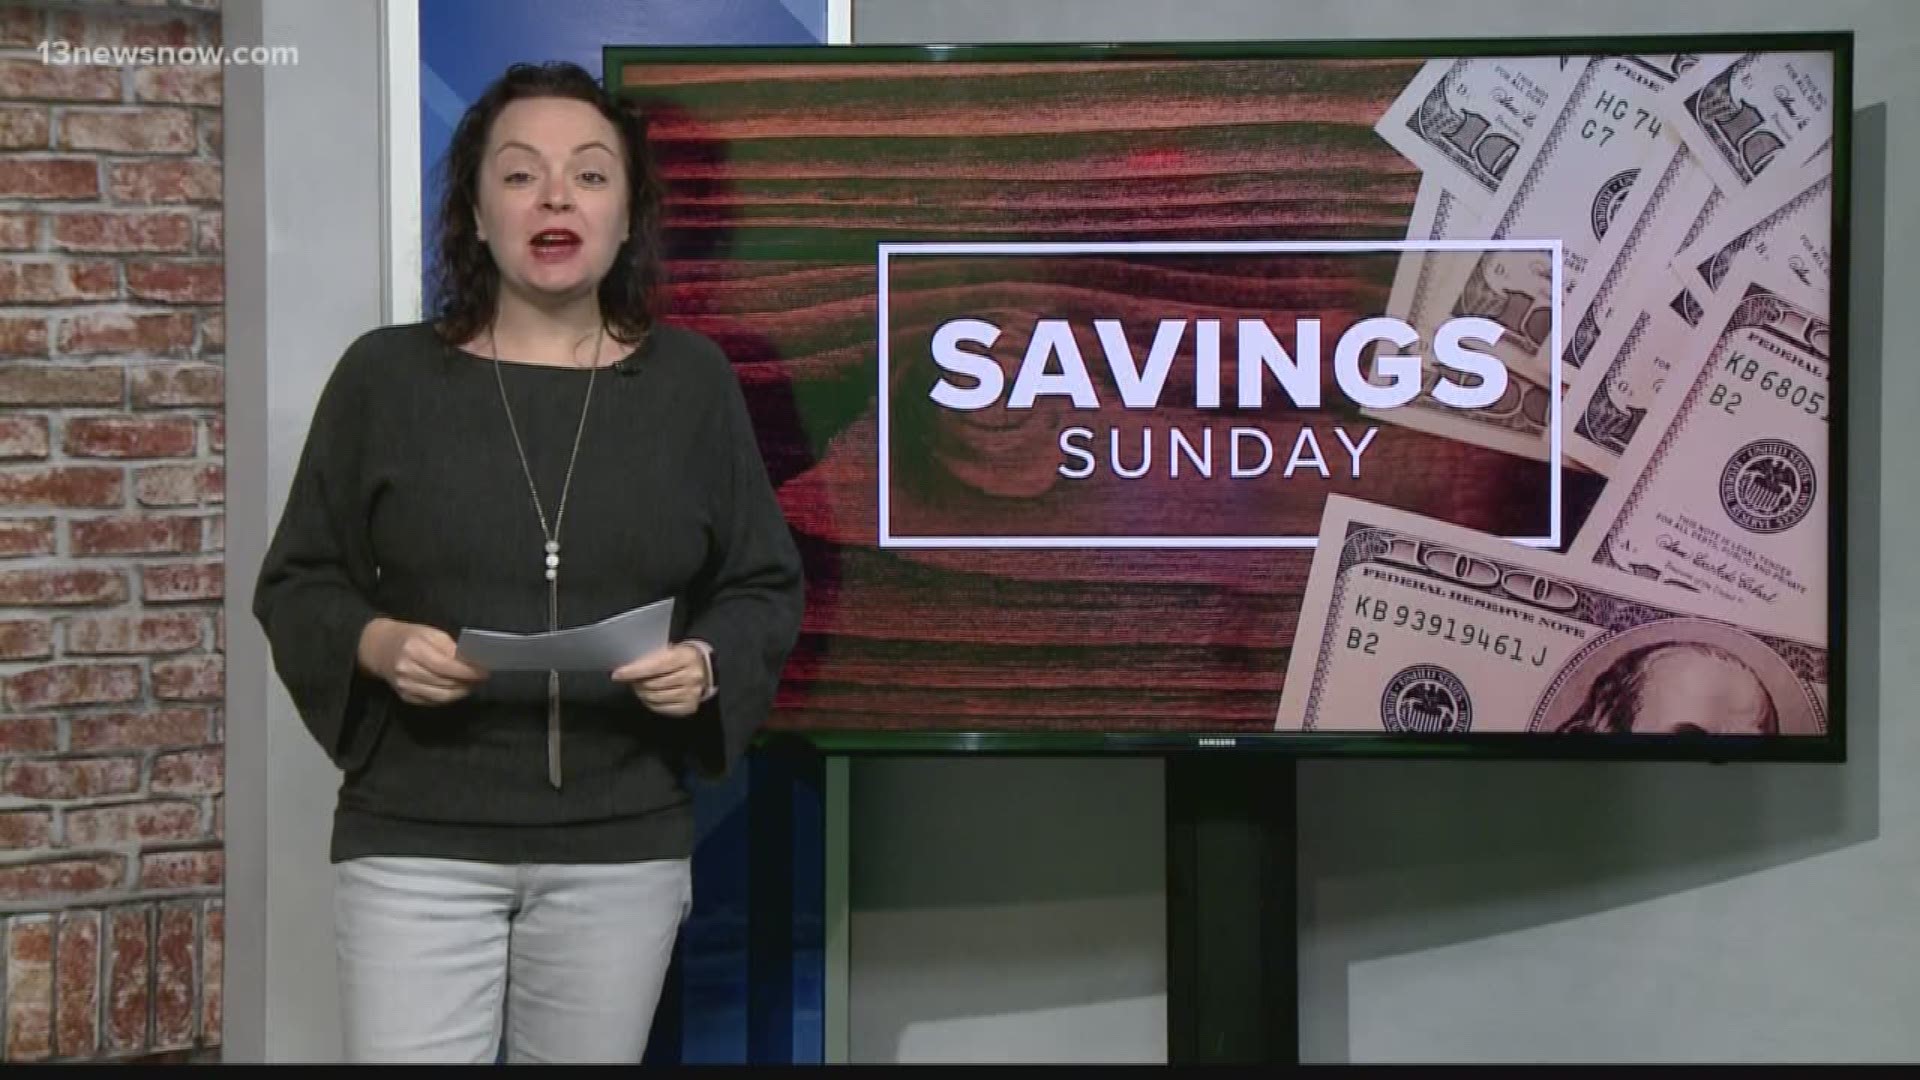 Laura Oliver from afrugralchick.com has your big savings for the week of Oct 28, 2018.